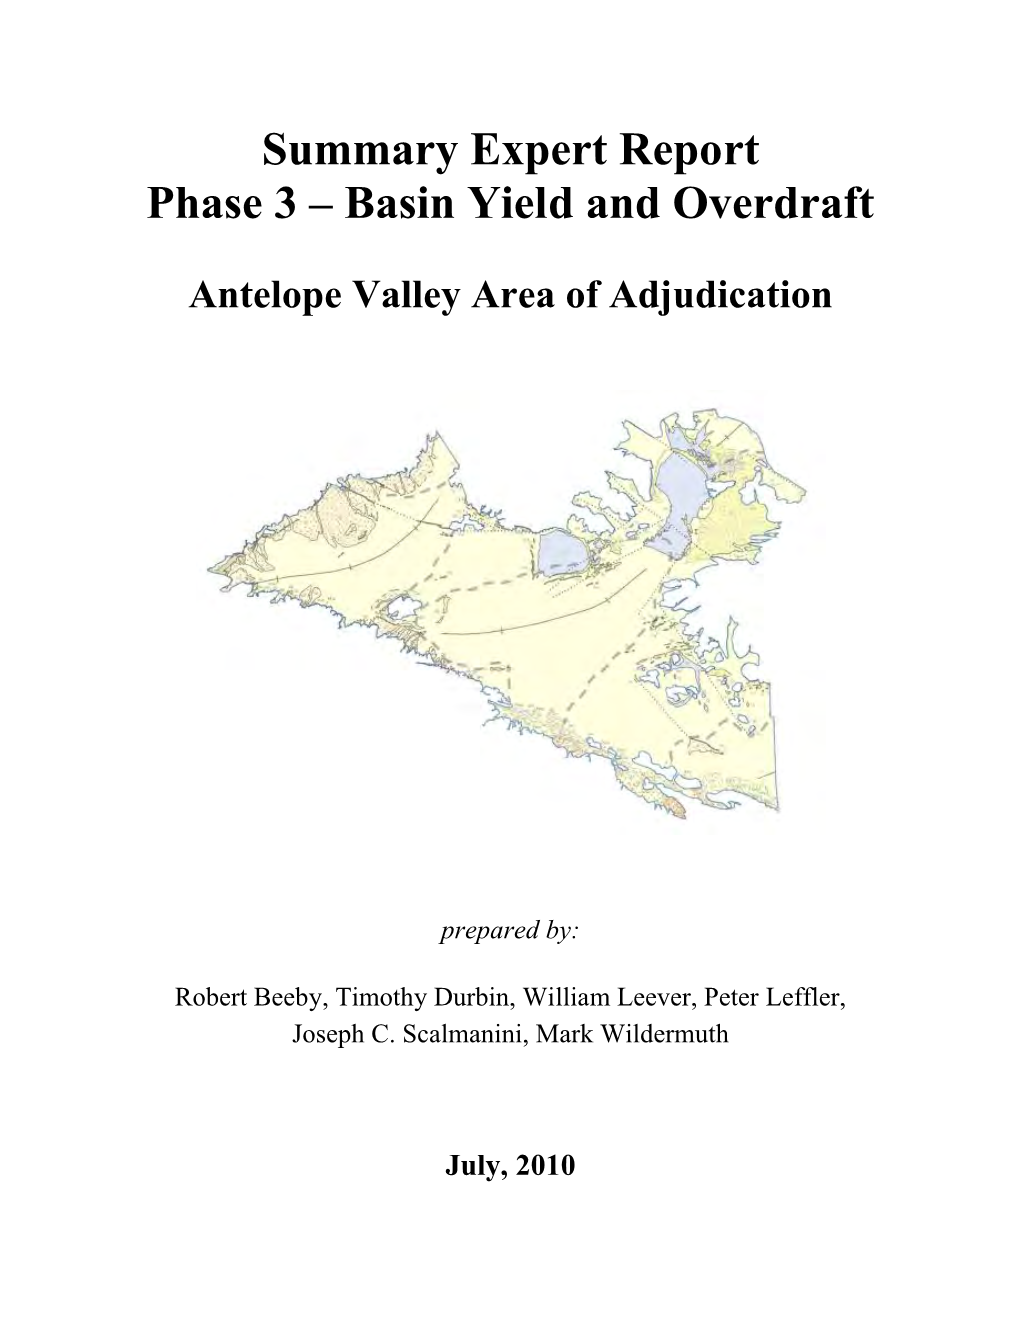 Summary Expert Report Phase 3 – Basin Yield and Overdraft